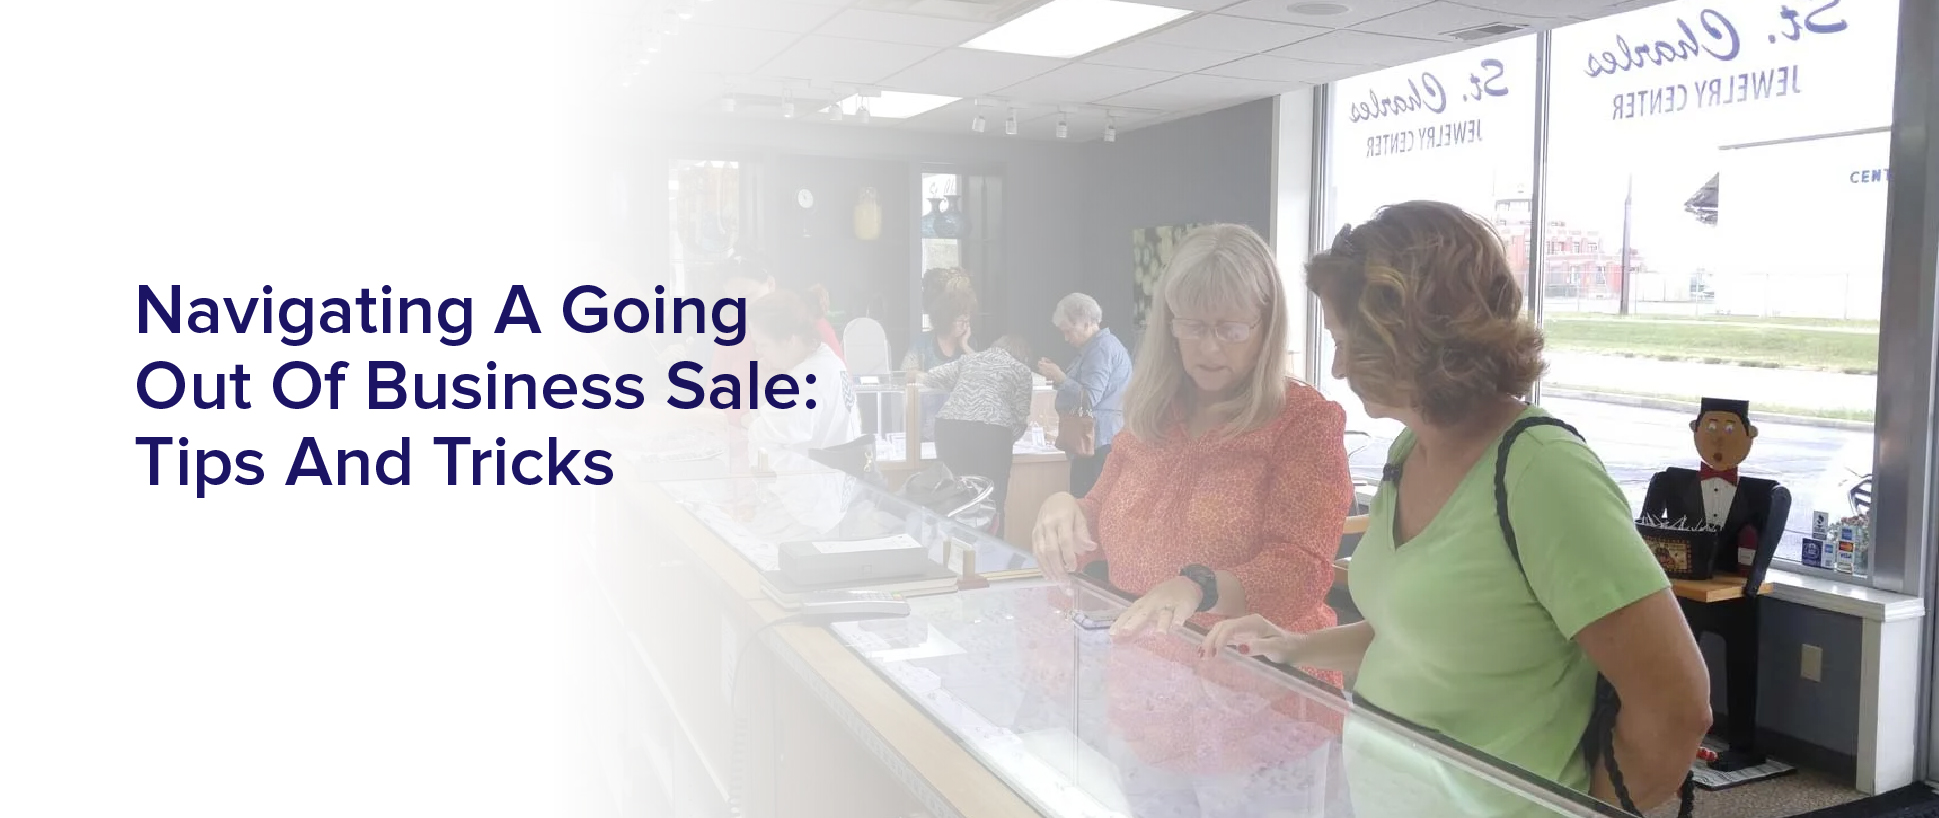 Navigating A Going Out Of Business Sale